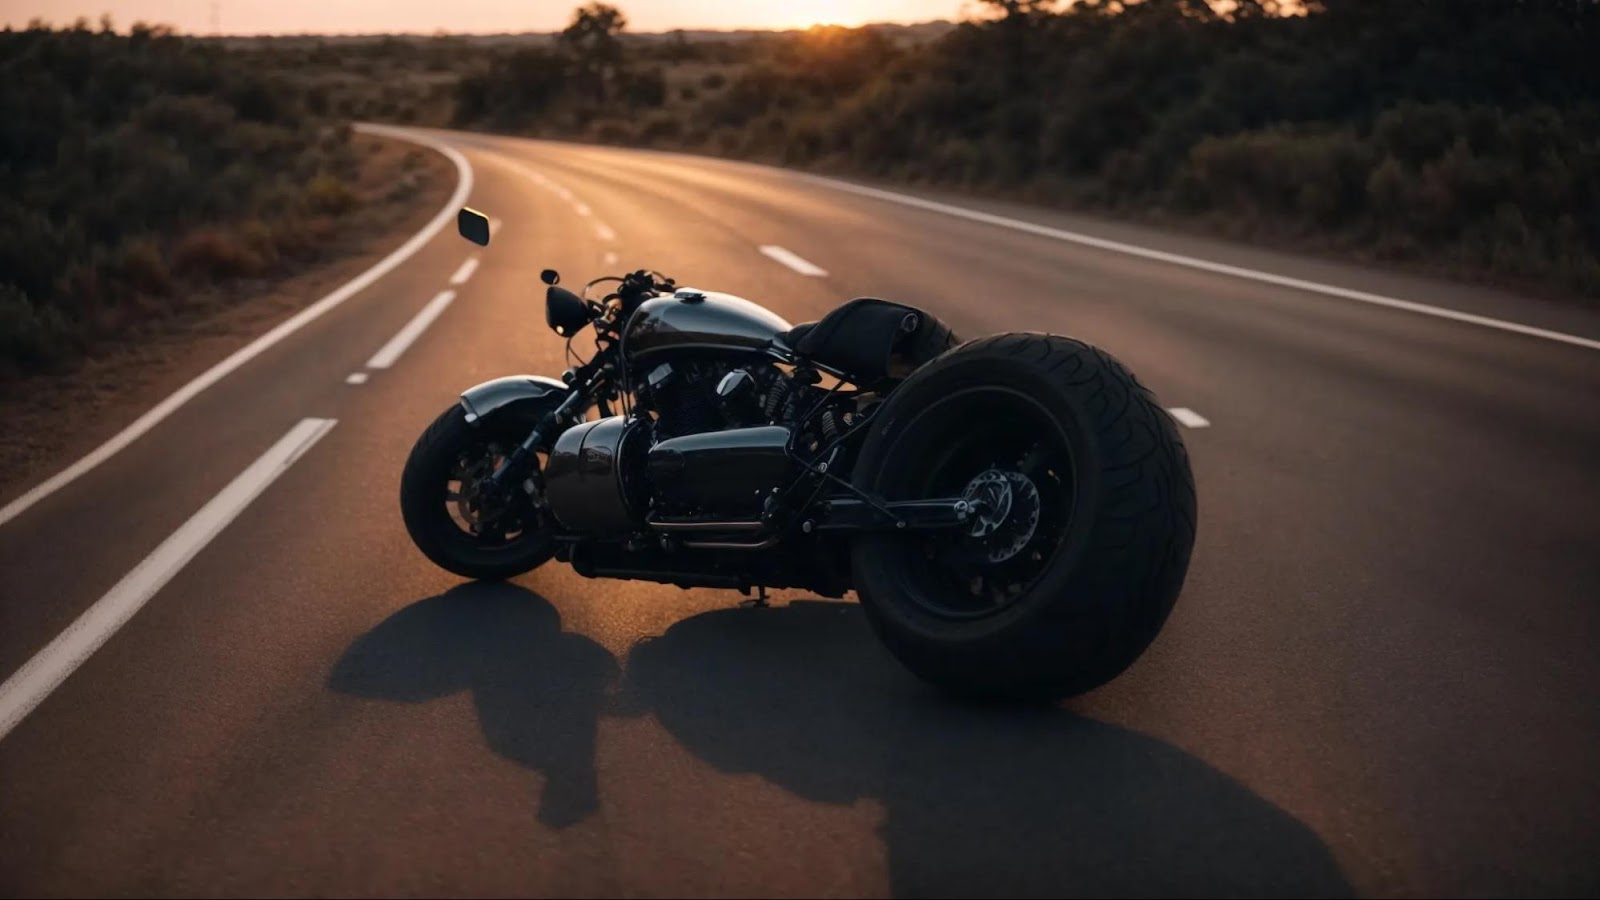 a motorcycle lying on its side in the middle of an empty road at dusk, its headlights dimly illuminating the surroundings.